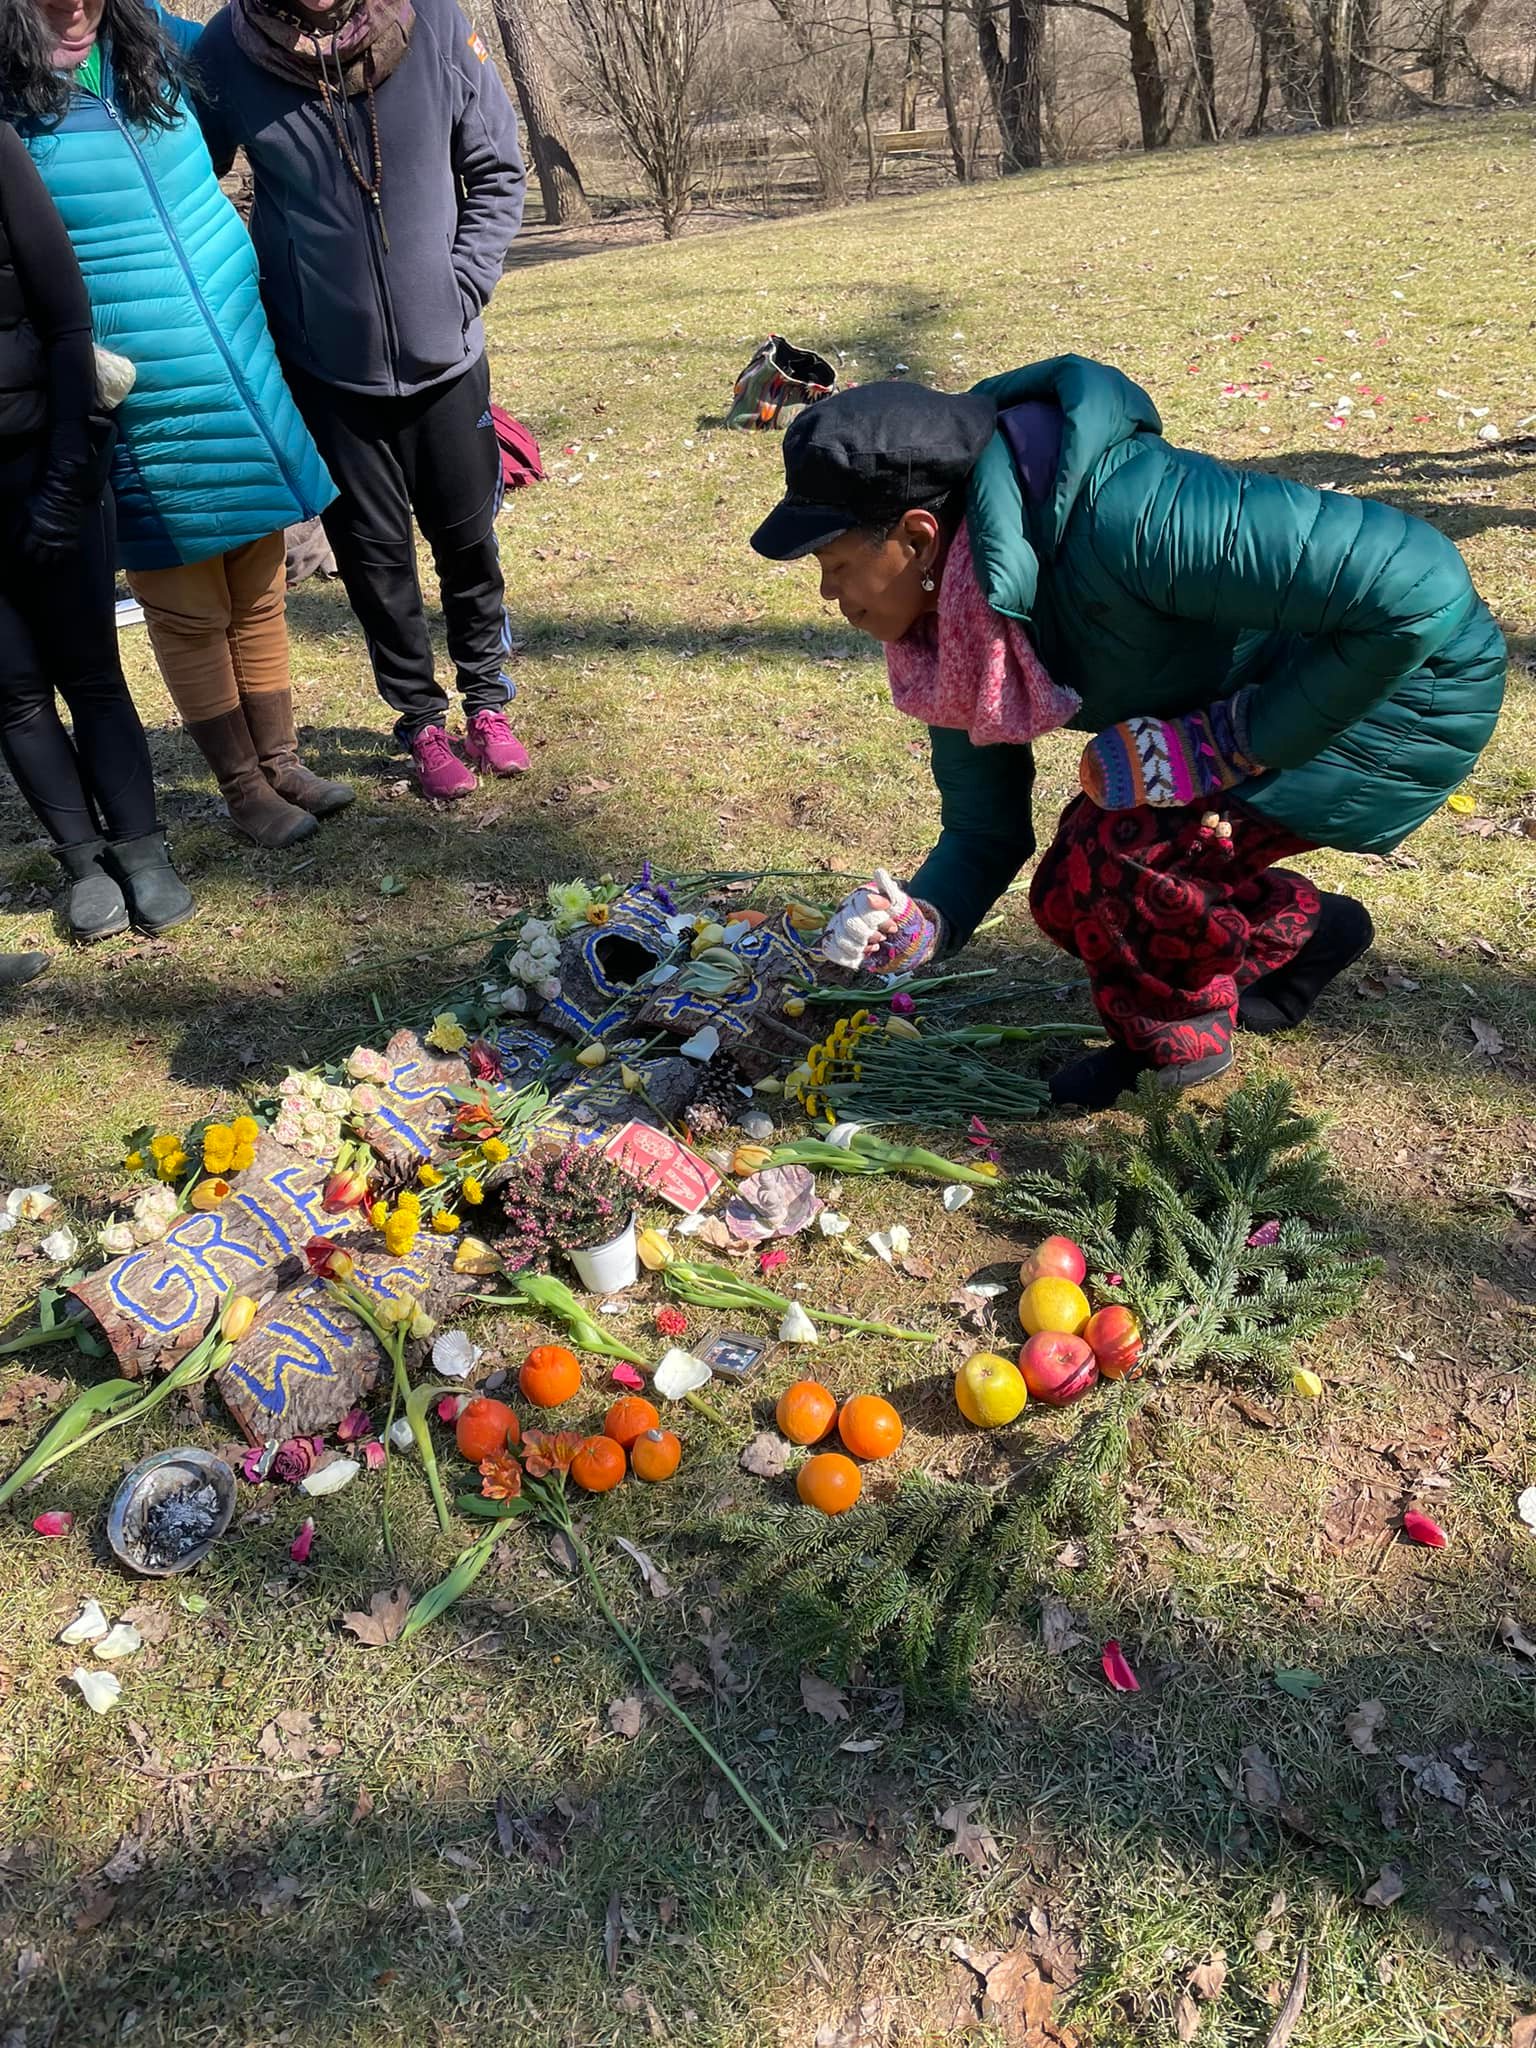 A Black woman brands over an arrangement of flowers and objects, as several prone stand nearby to observe.